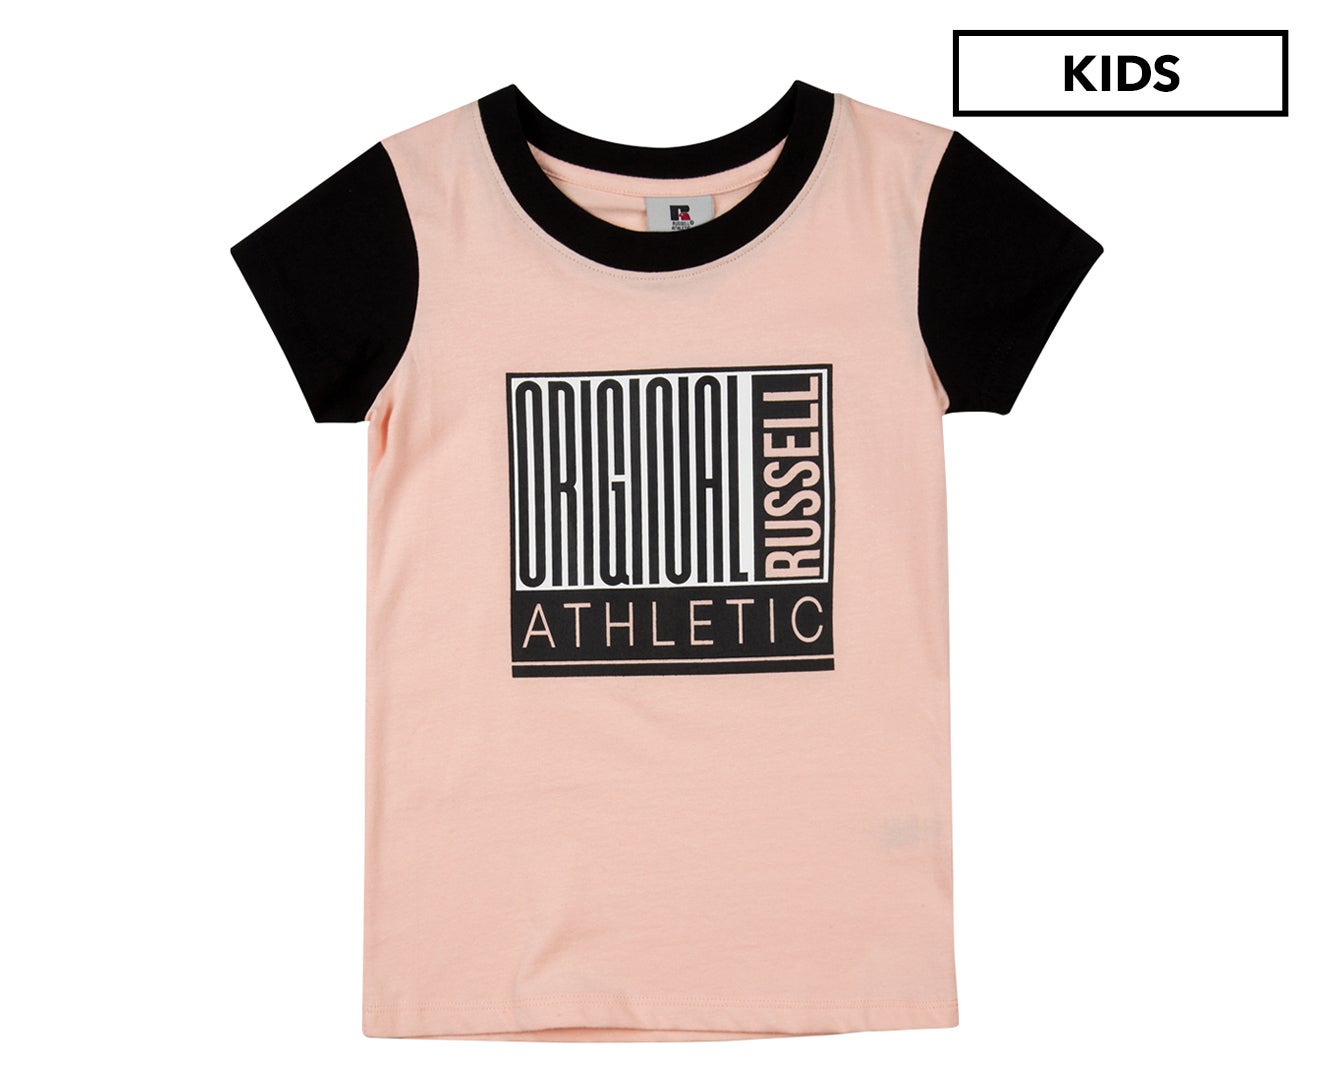 Russell Athletic Girls Block Part T-Shirt Athletic Top Size 8 Tee Tropical Peach